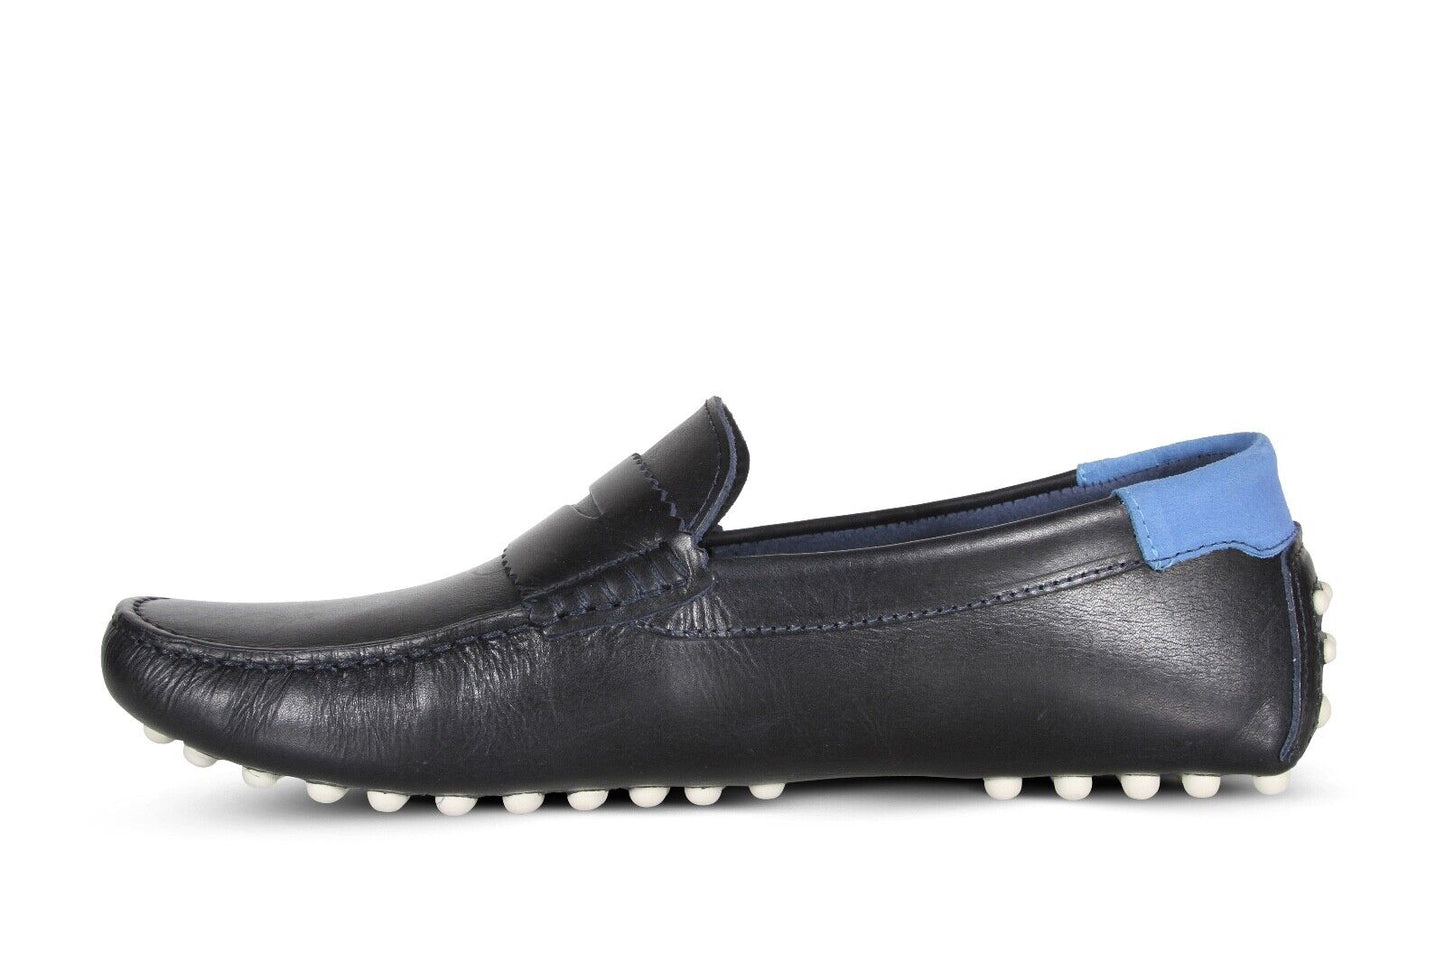 Lacoste Concours 123 1 CMA Men’s Leather Loafers in Navy Blue 745CMA0032J18